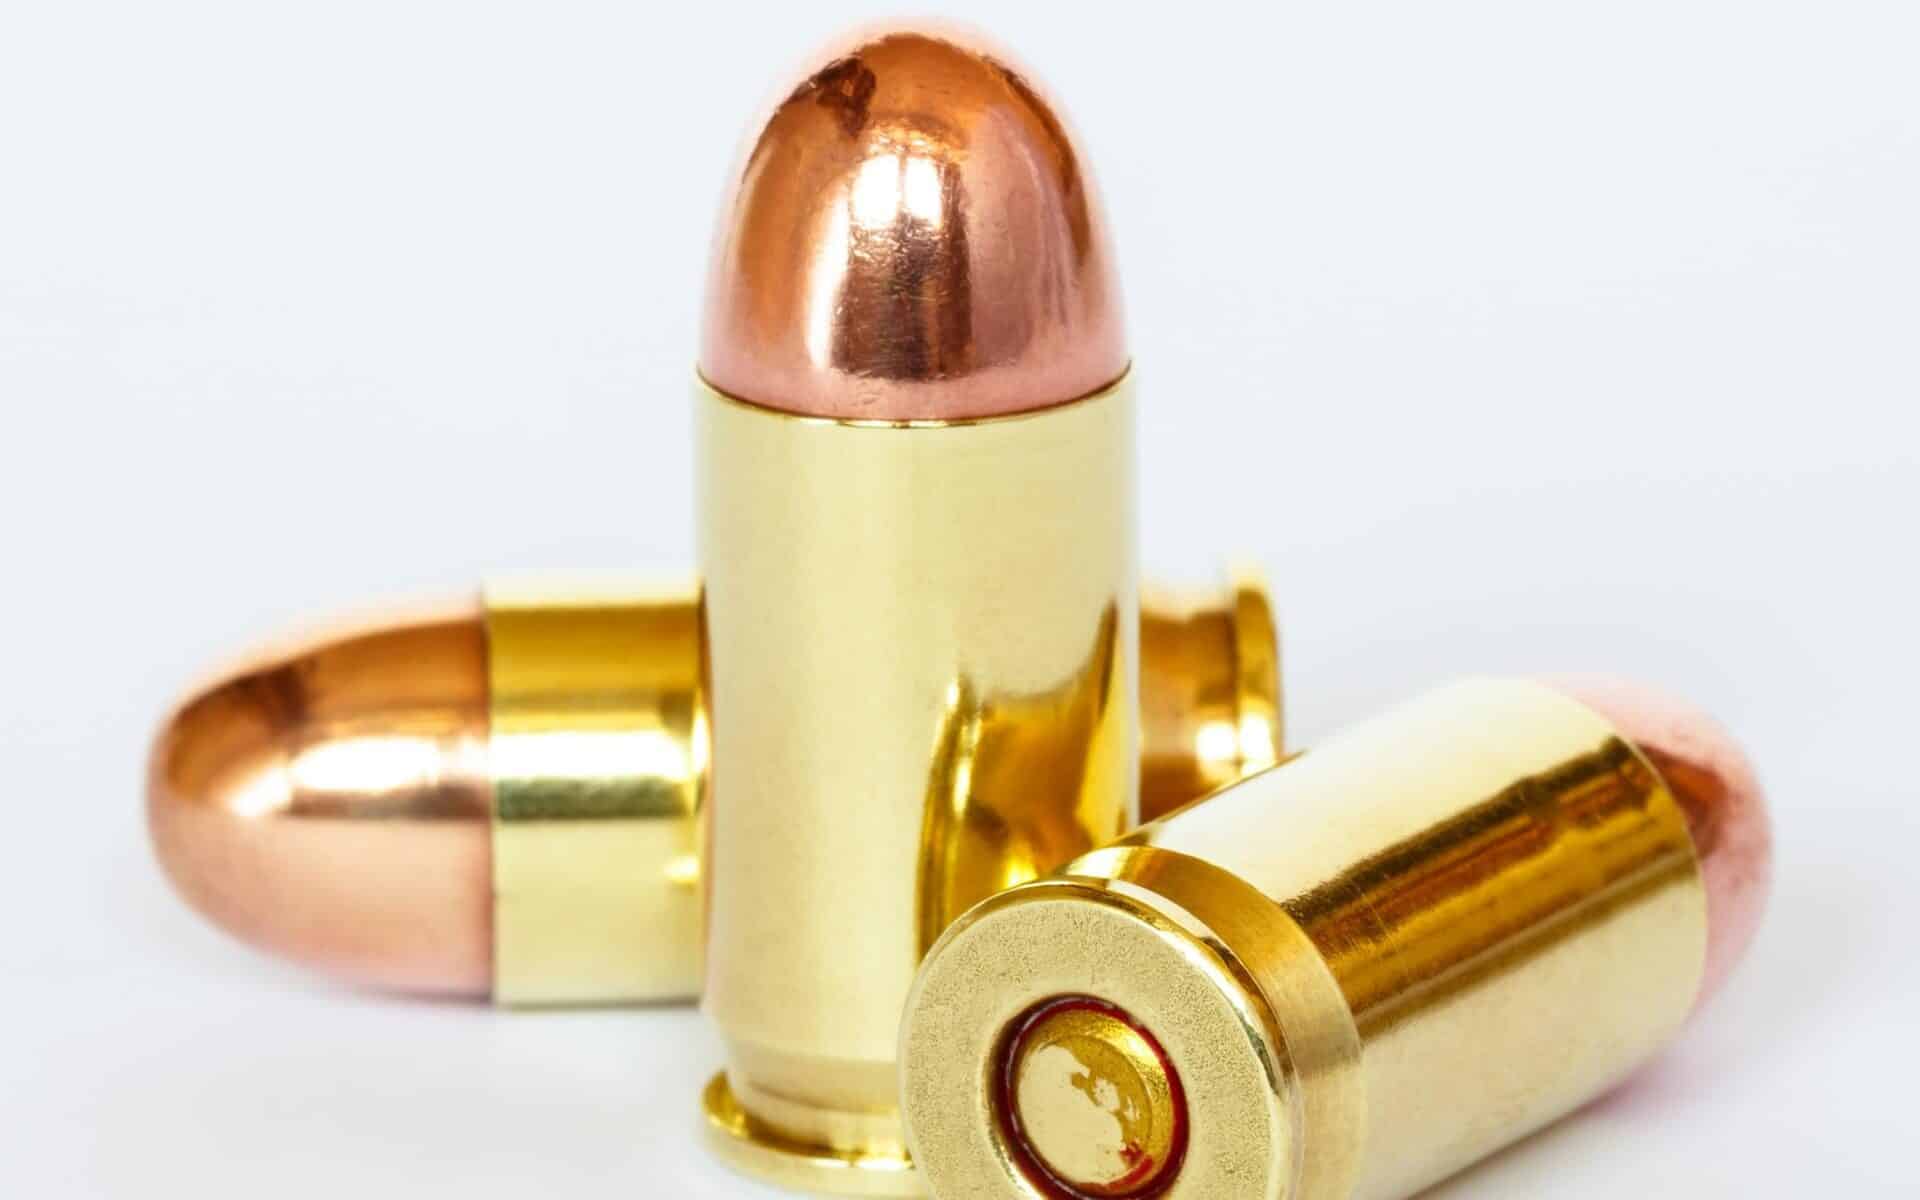 10mm vs 357: Which is Better for Me?